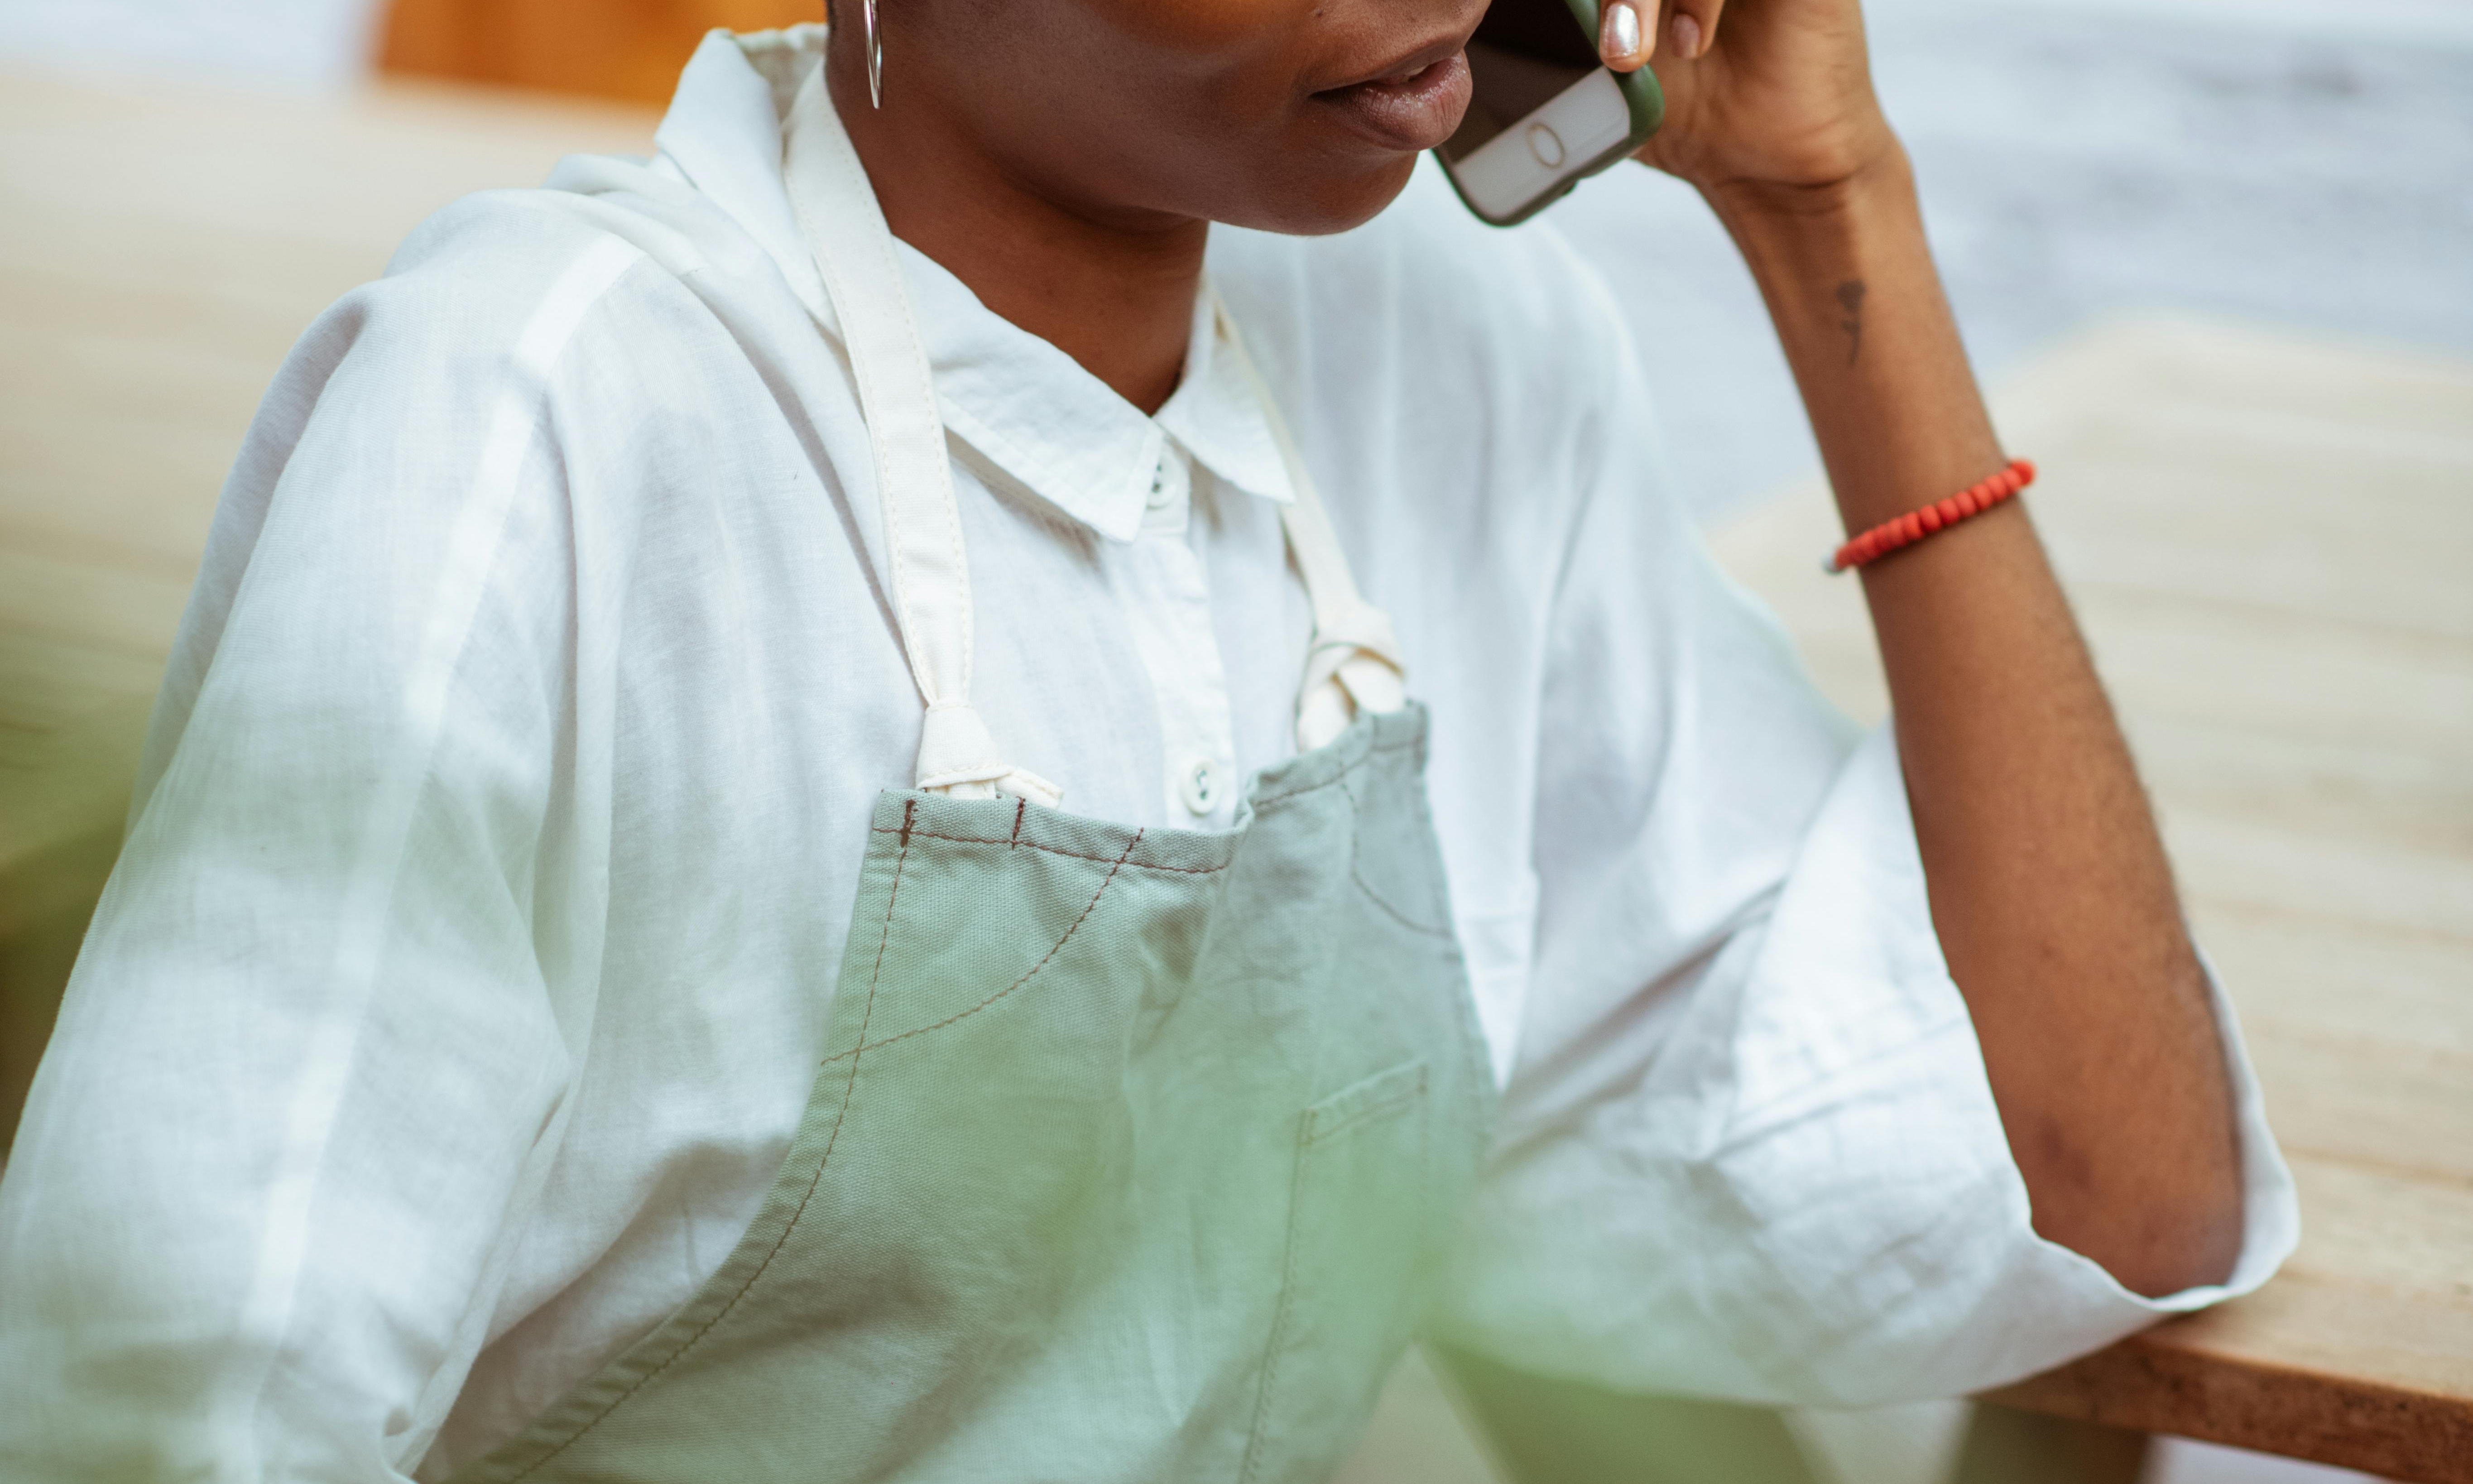 A woman on a cell phone call | Source: Pexels